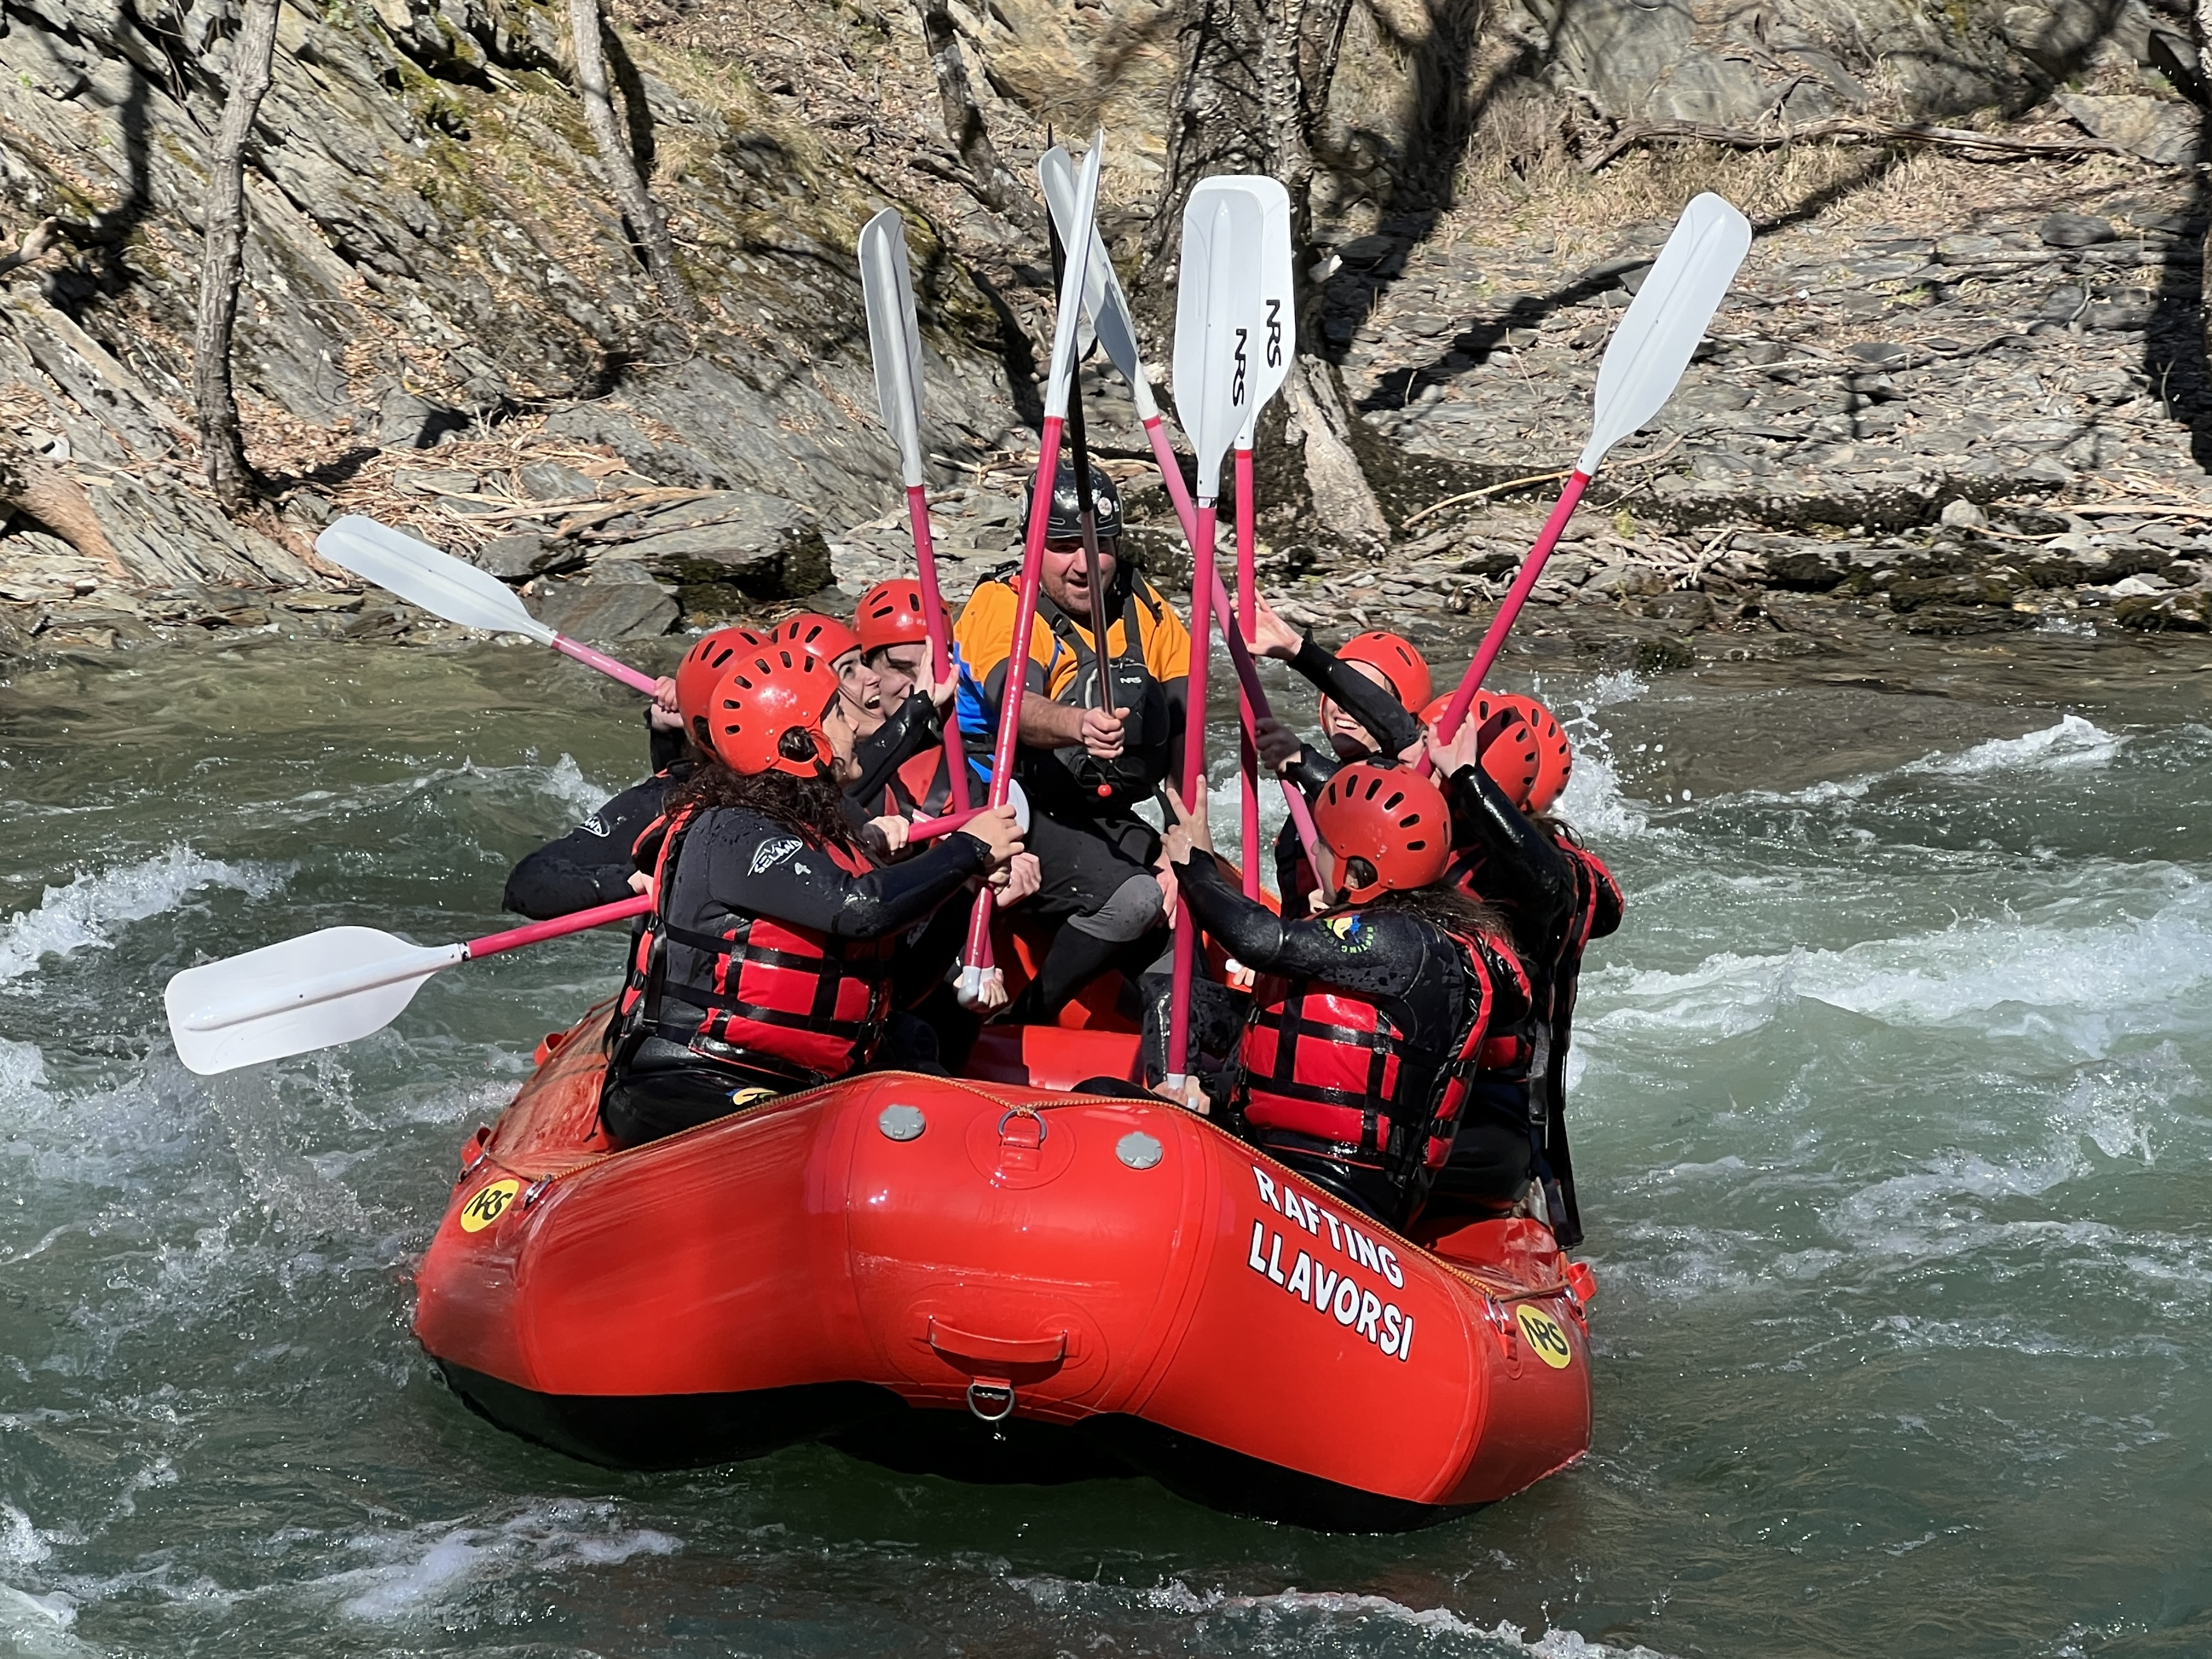 A group of students rafting in the Noguera Pallaresa river